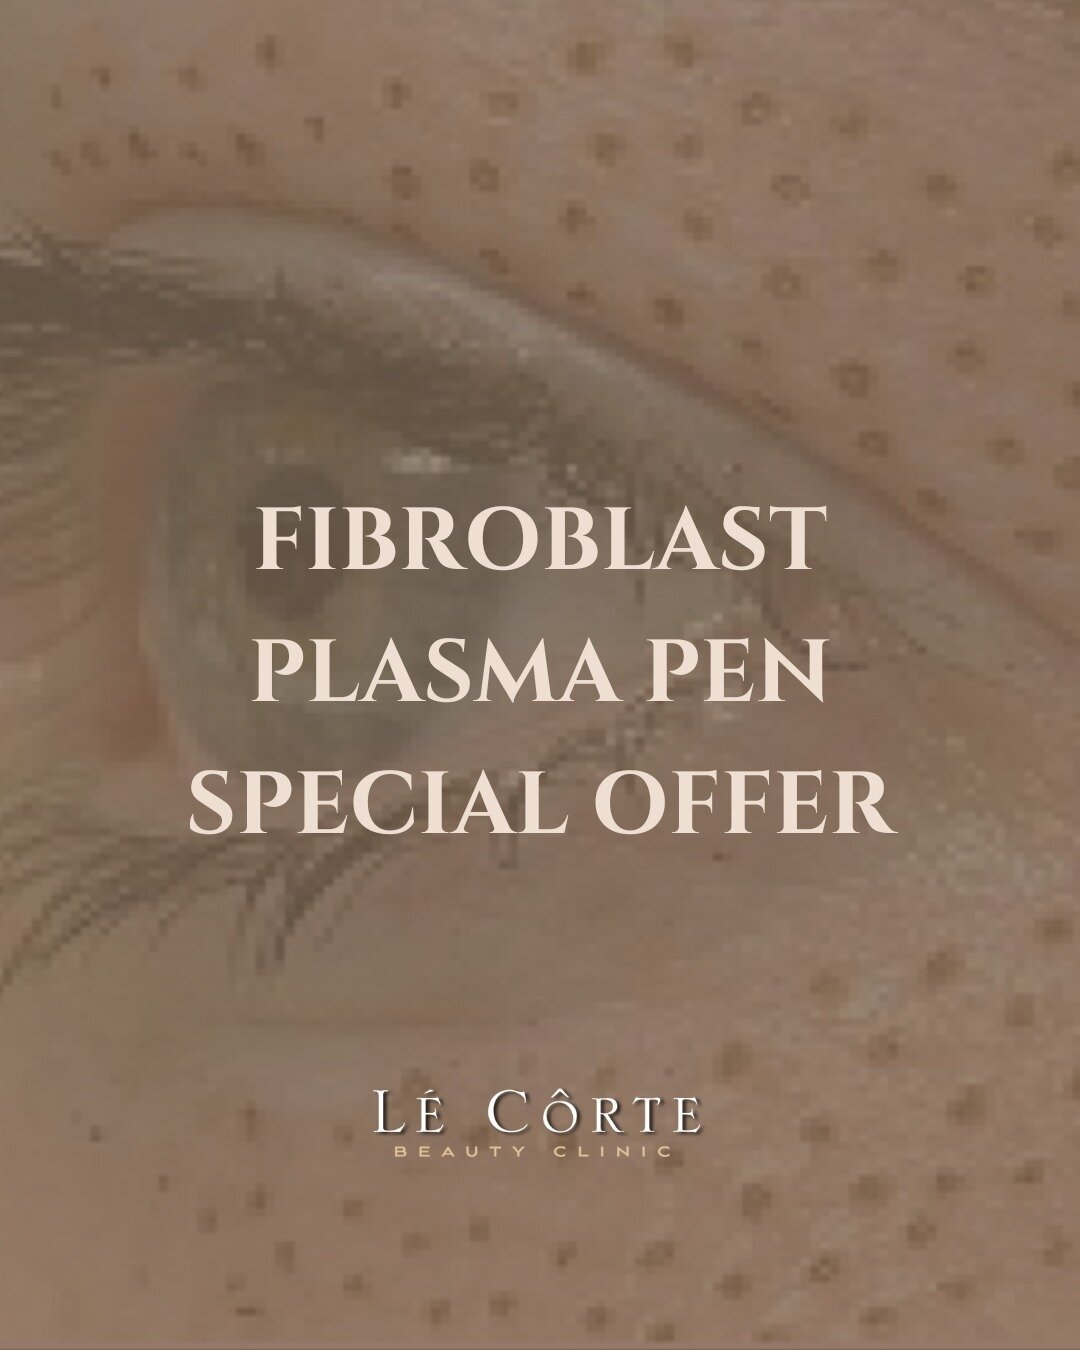 🤎 Fibroblast Plasma Pen Special Offer 🤎

The first 10 customers to book will receive 20% off their Fibroblast Plasma Pen treatment! 

*T's &amp; C's apply. Price will be determined depending on area sized at the time of consultation.

Why should yo